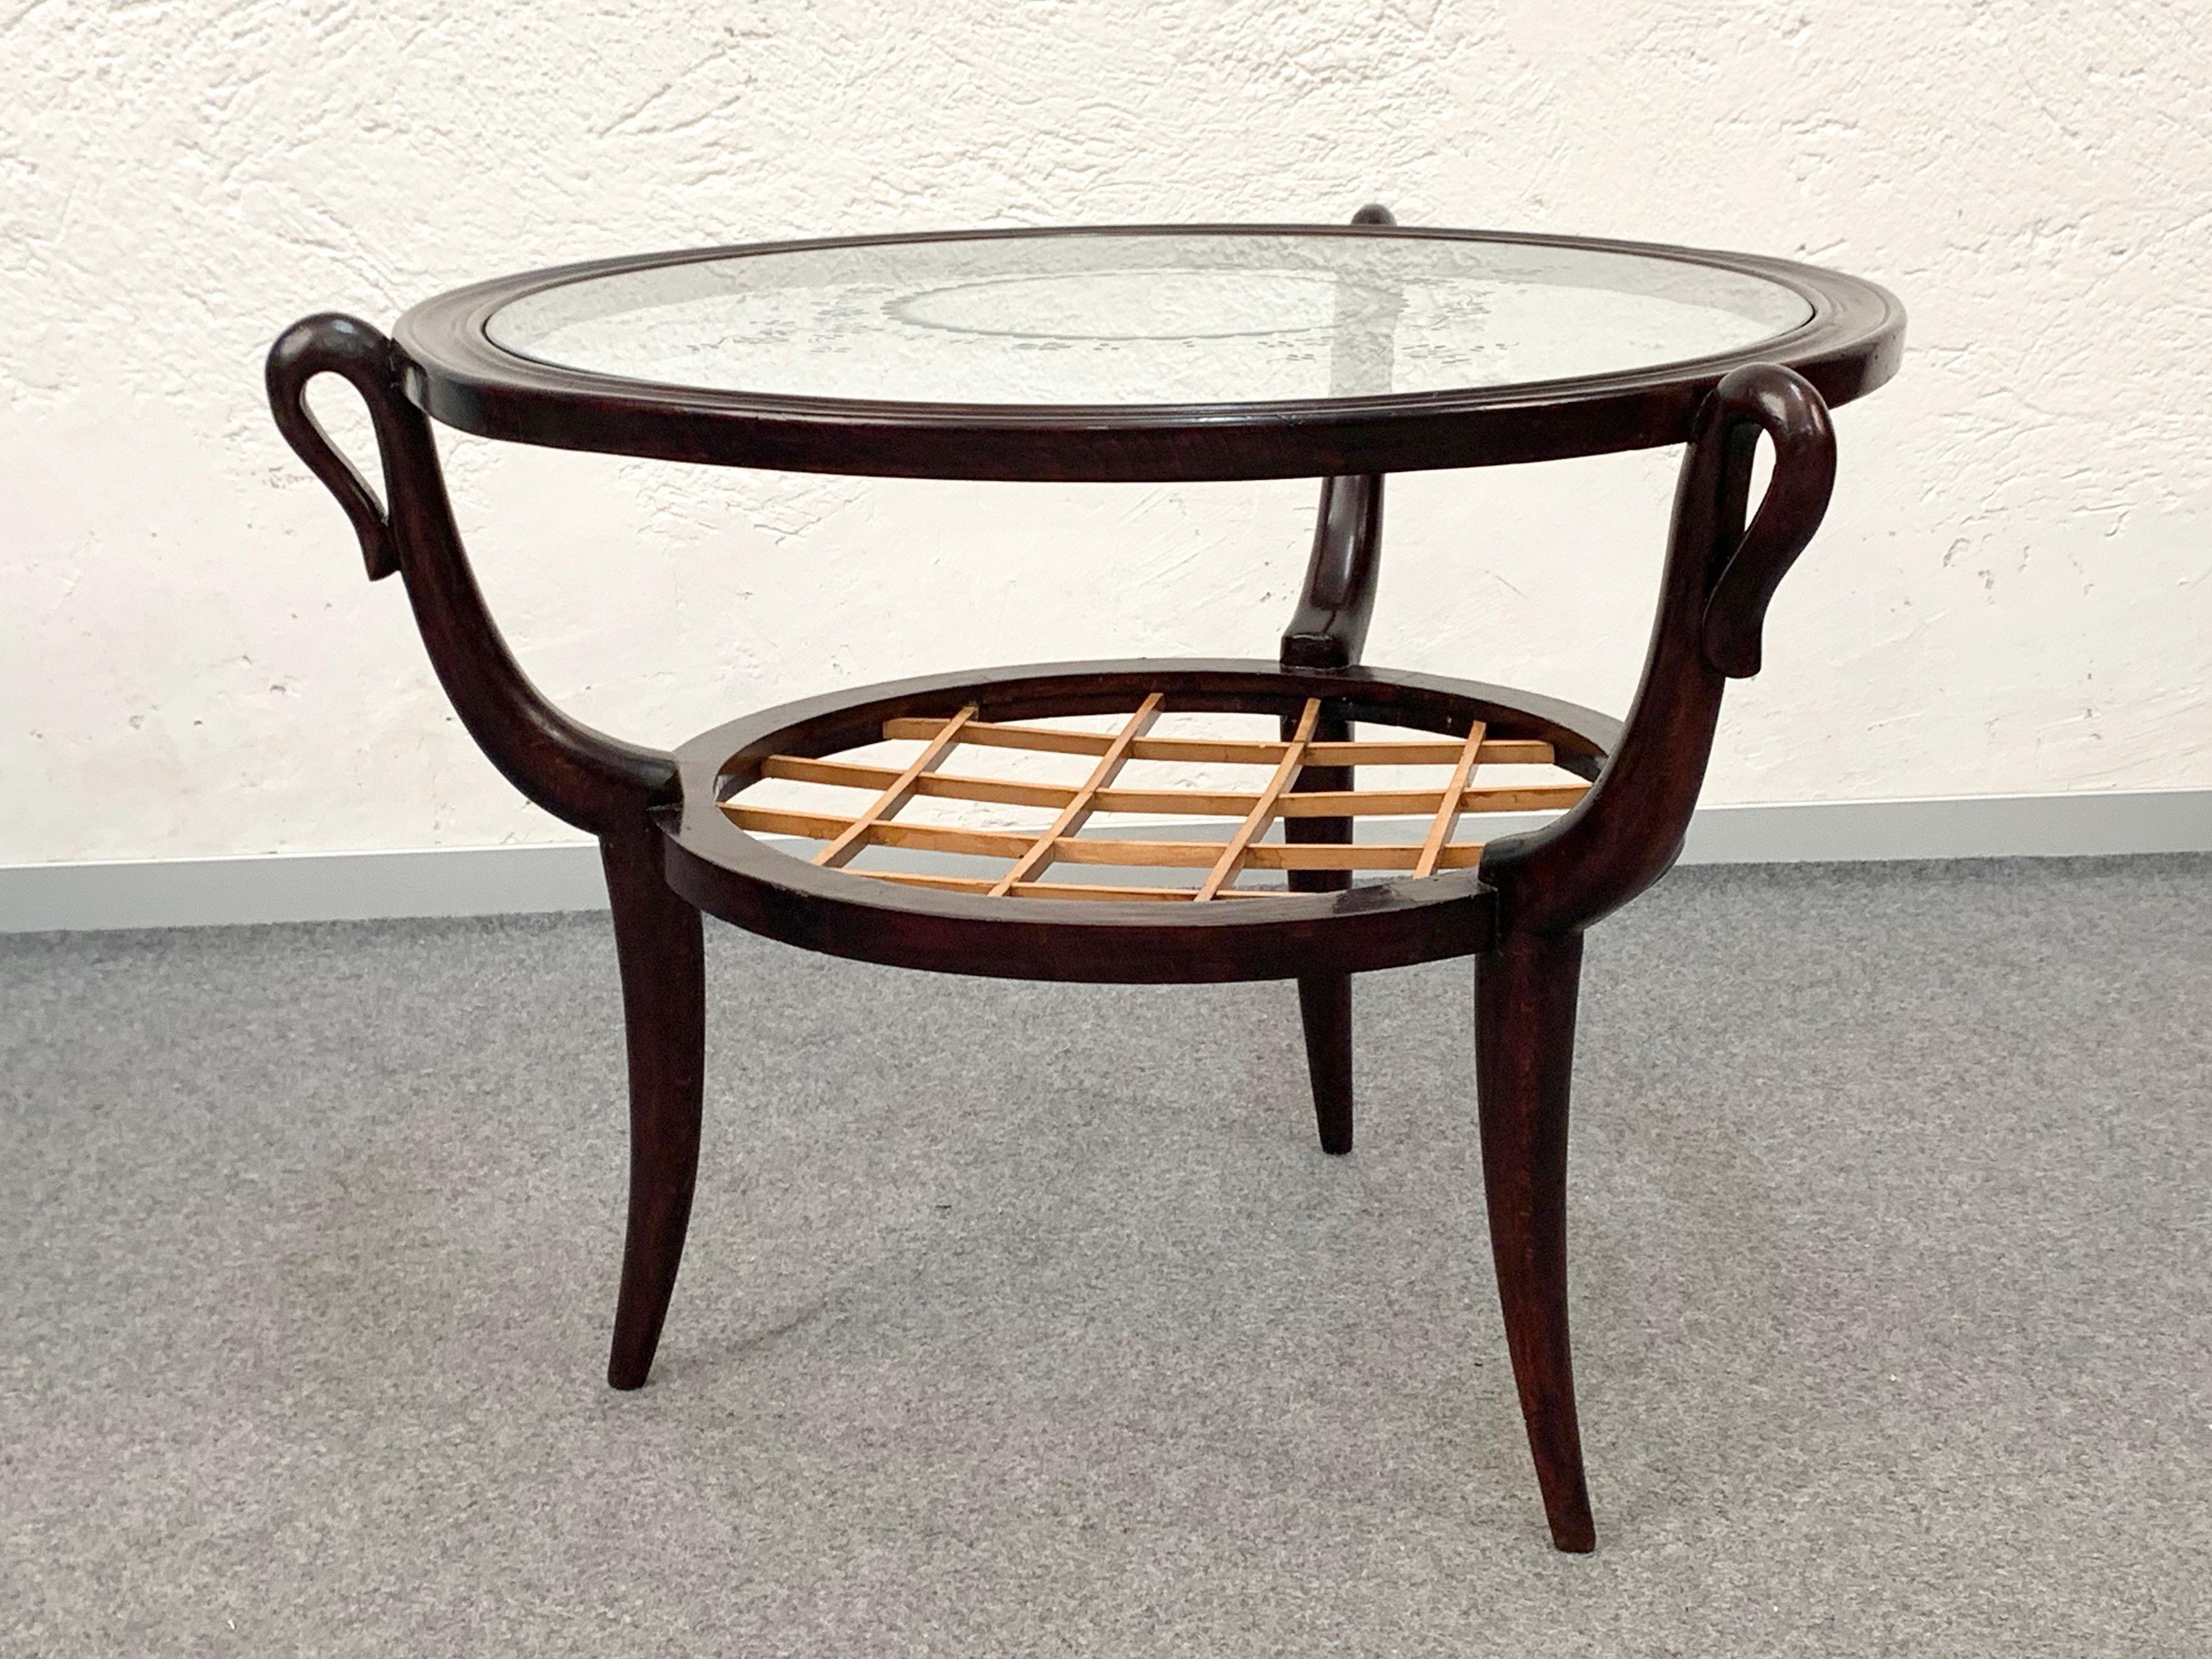 Two-level Round Wood and Glass Italian Coffee Table Gio Ponti Style, 1950s For Sale 1